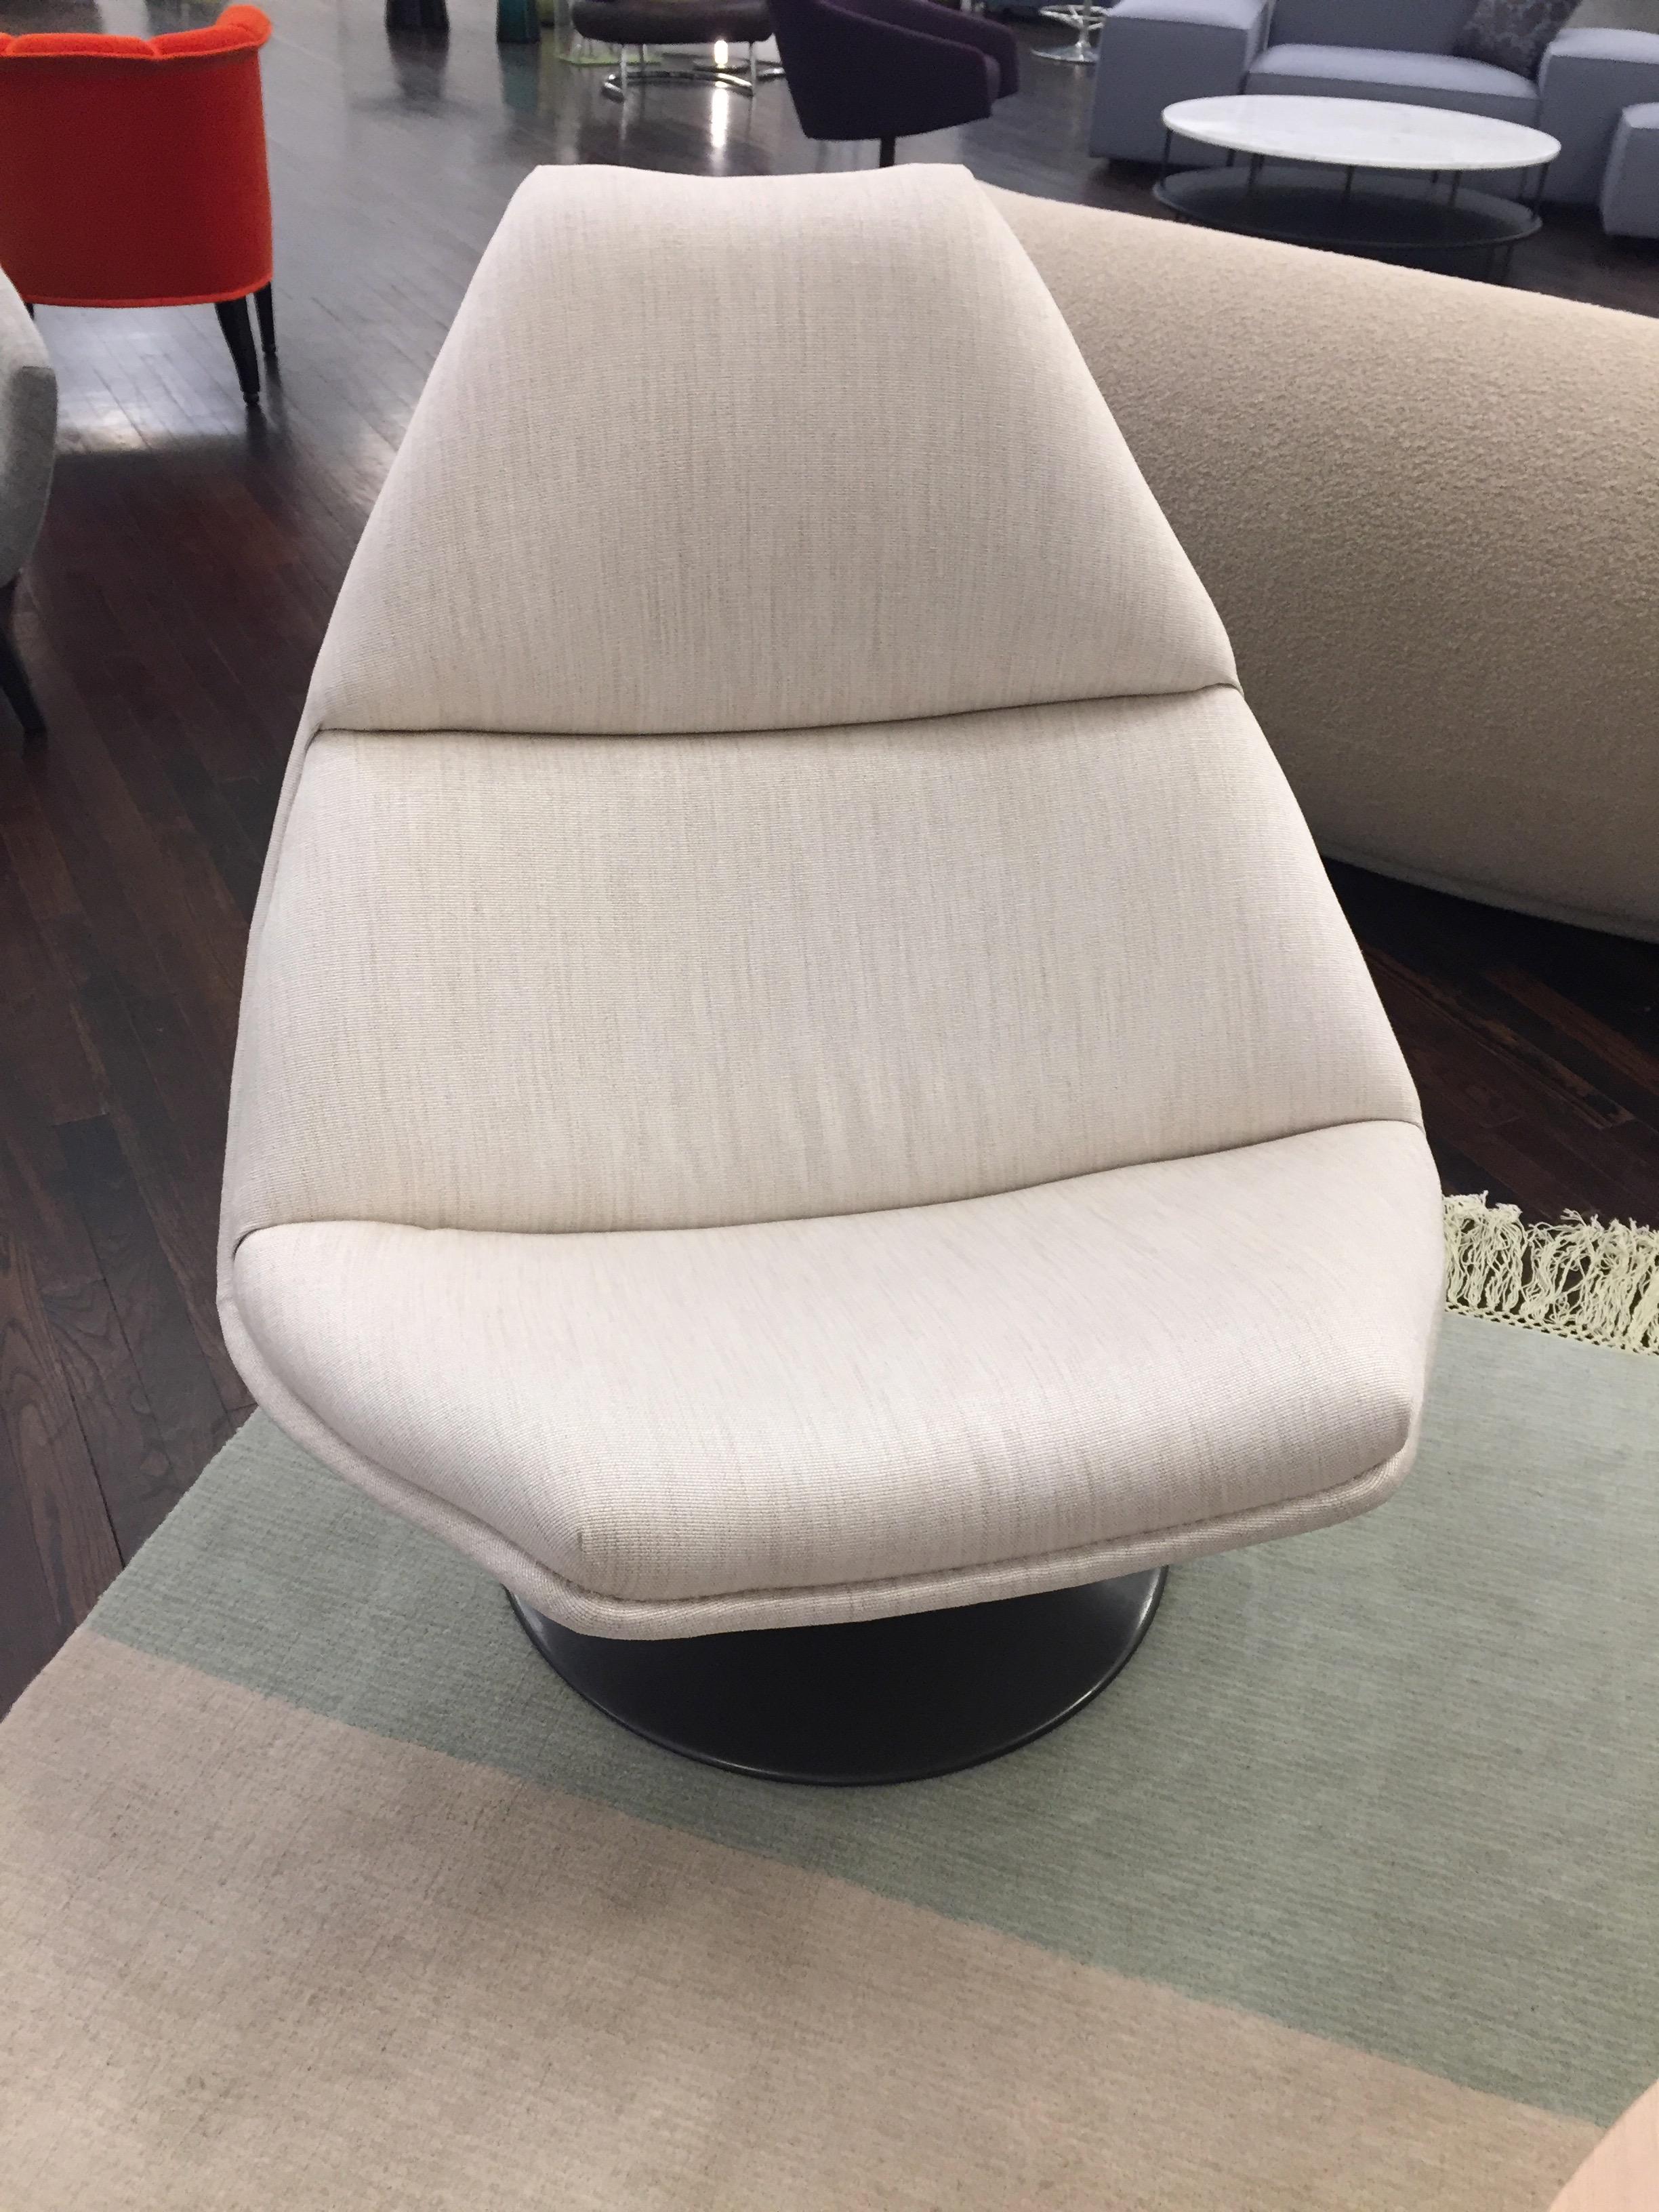 1967, Geoffrey D. Harcourt designed.
 The shell is large enough to curl up in and is the paragon of his philosophy that “the chair should focus on the person, and not the other way around.” 
Original price: $4,284.
 